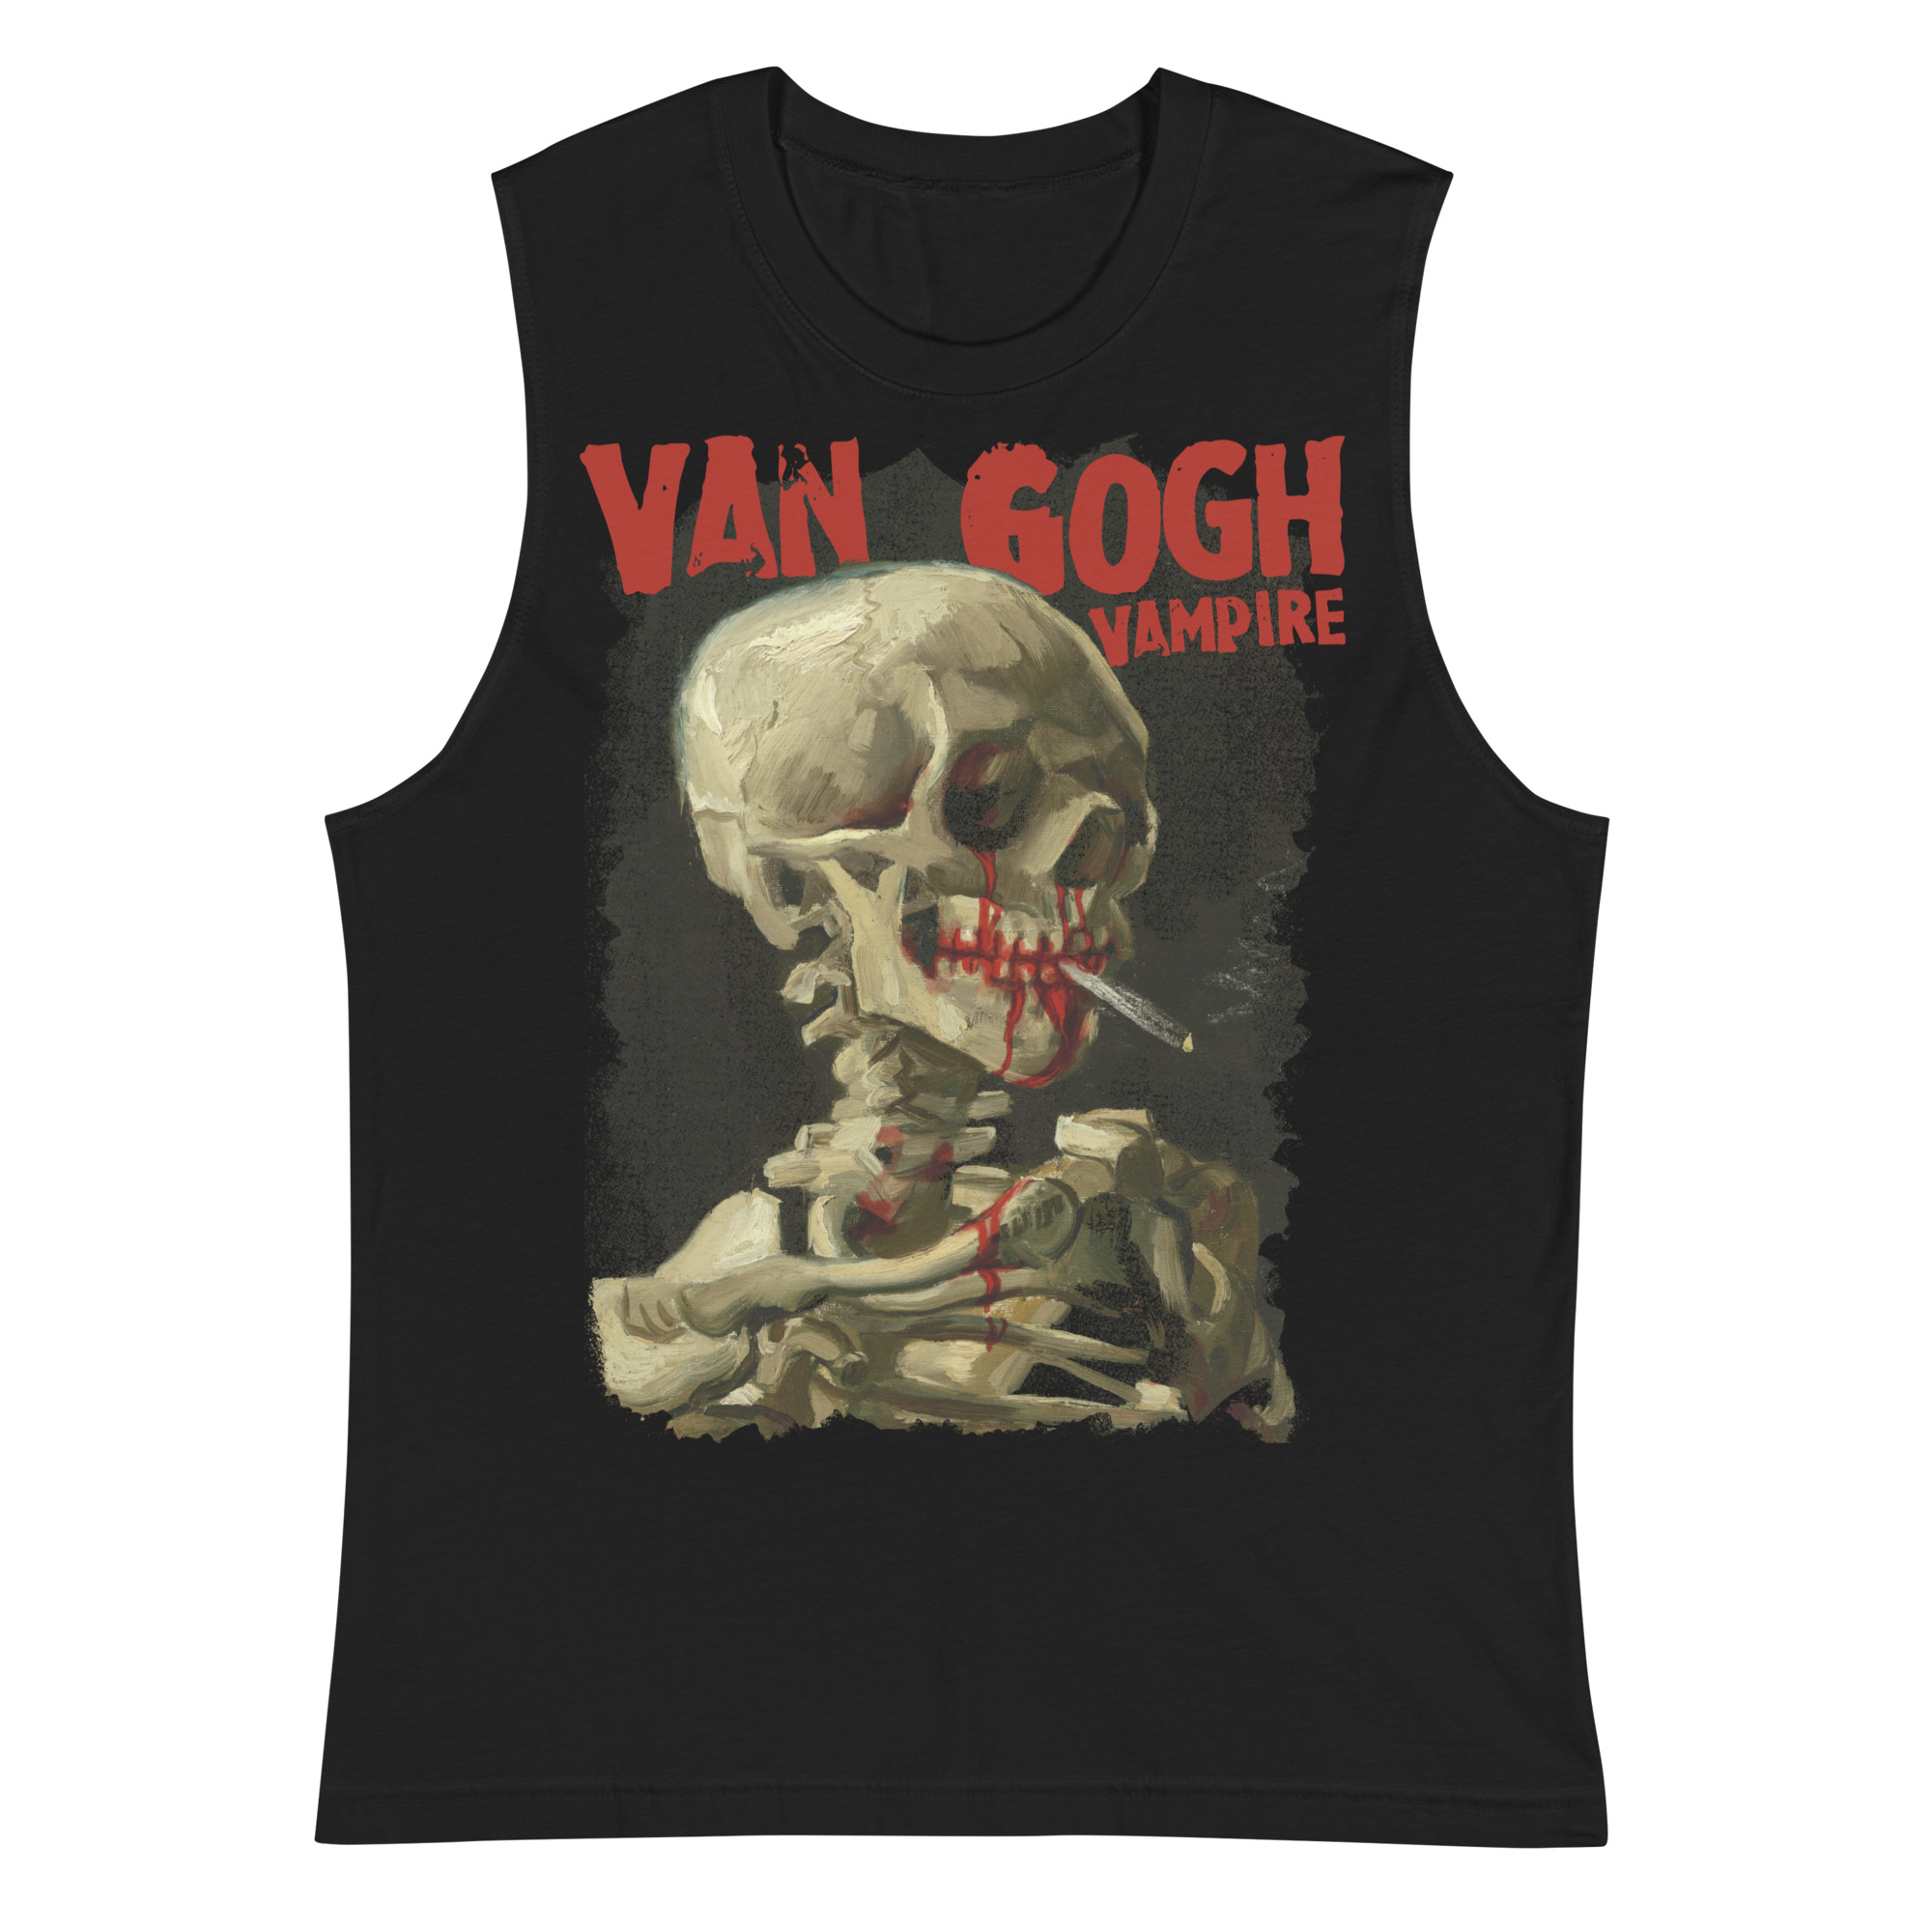 Featured image for “VAN GOGH VAMPIRE - Muscle Shirt”